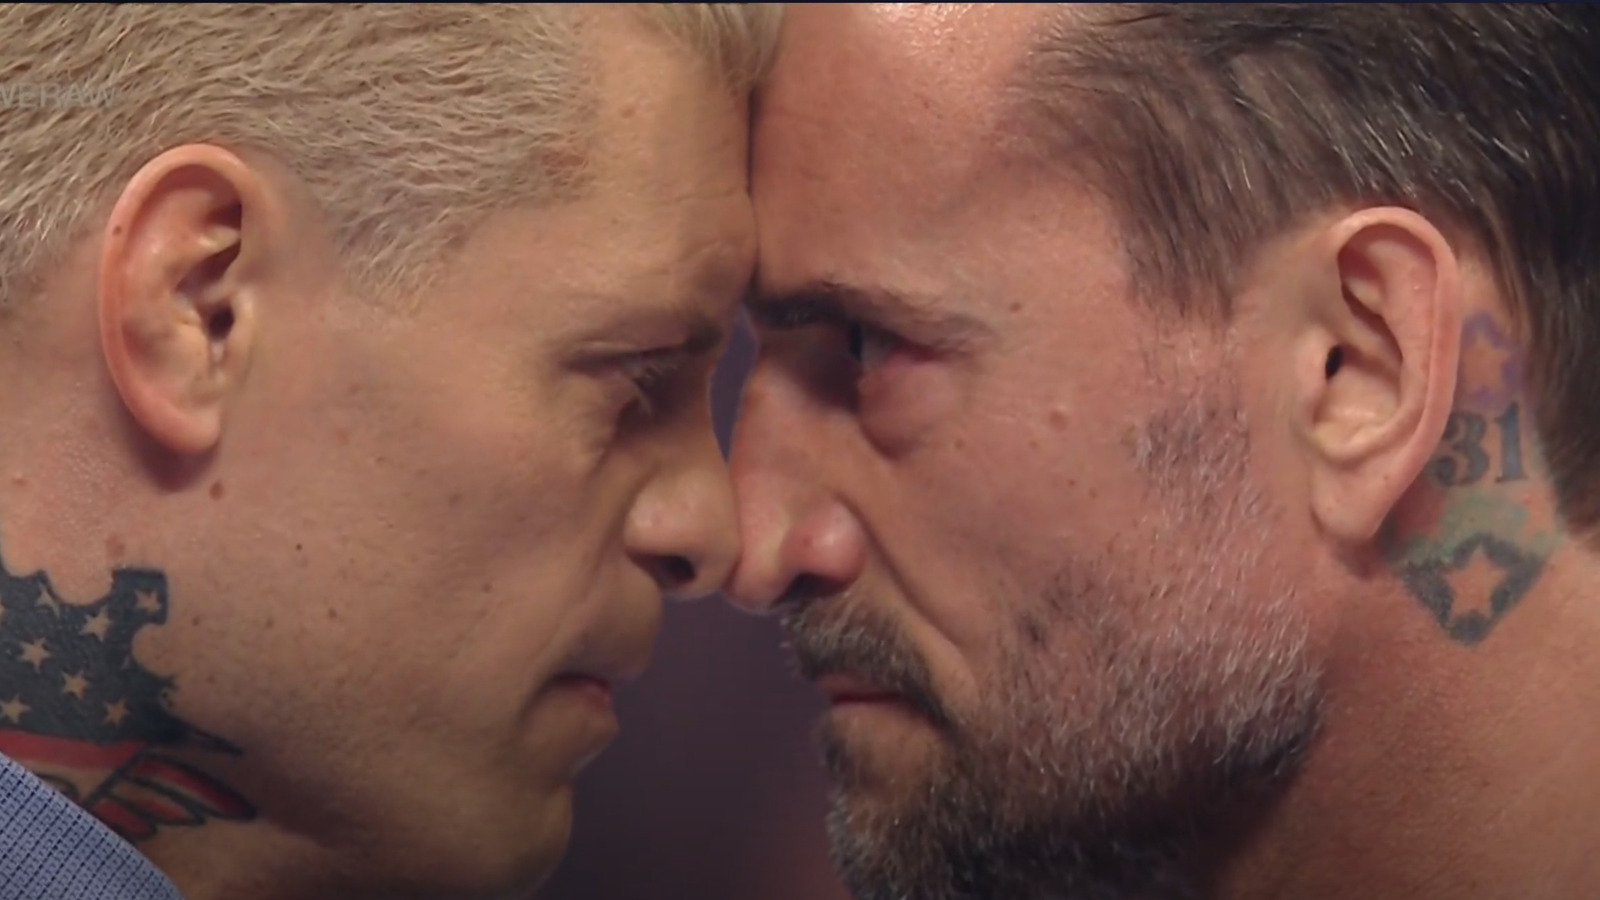 Cody Rhodes And CM Punk Get Personal In WWE Raw Promo Segment Ahead Of Royal Rumble